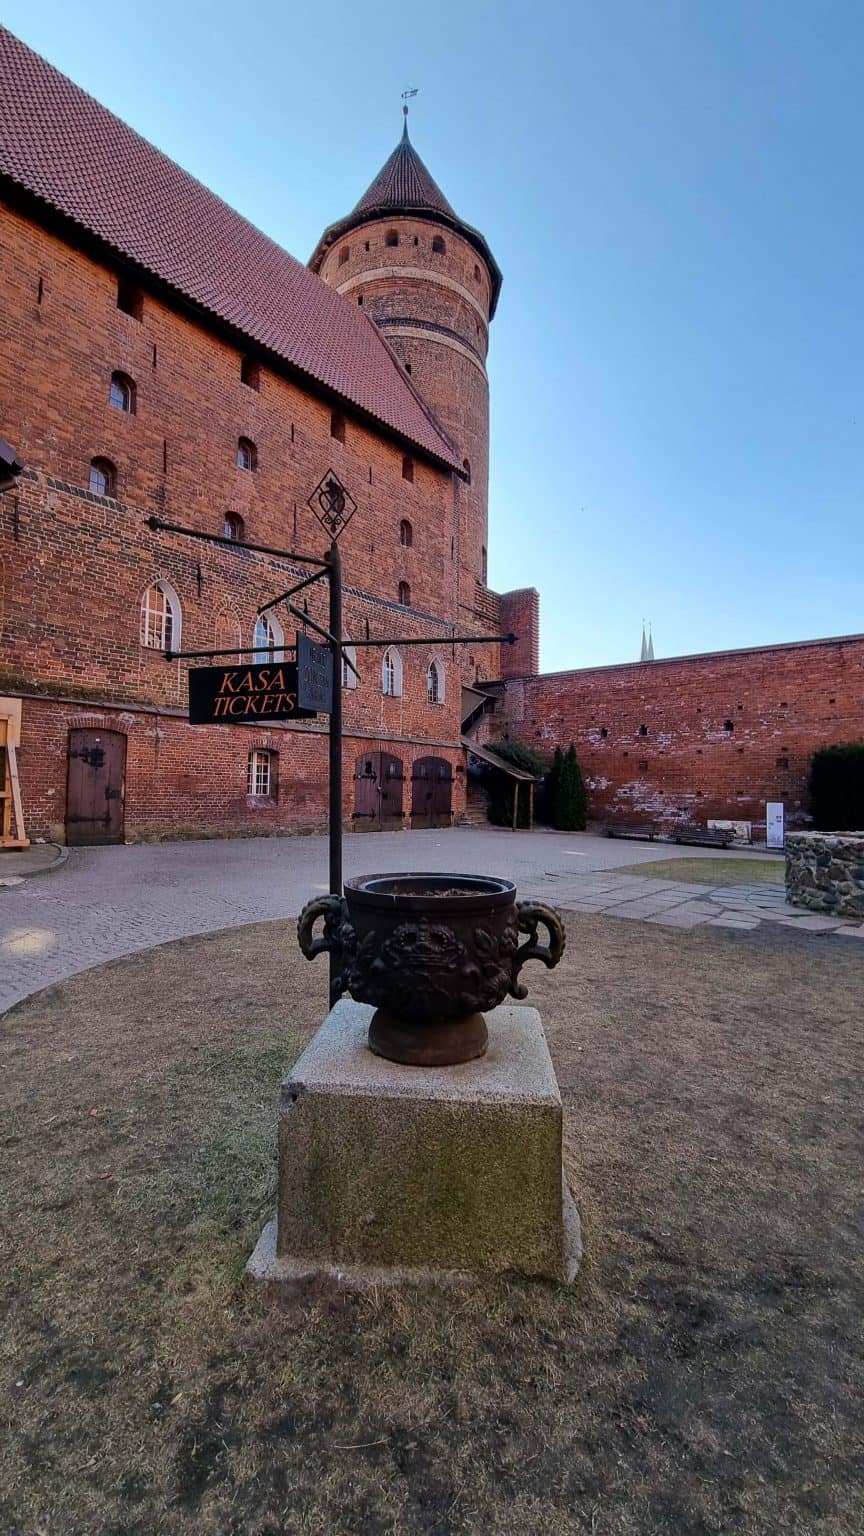 Olsztyn Castle south wing and tower